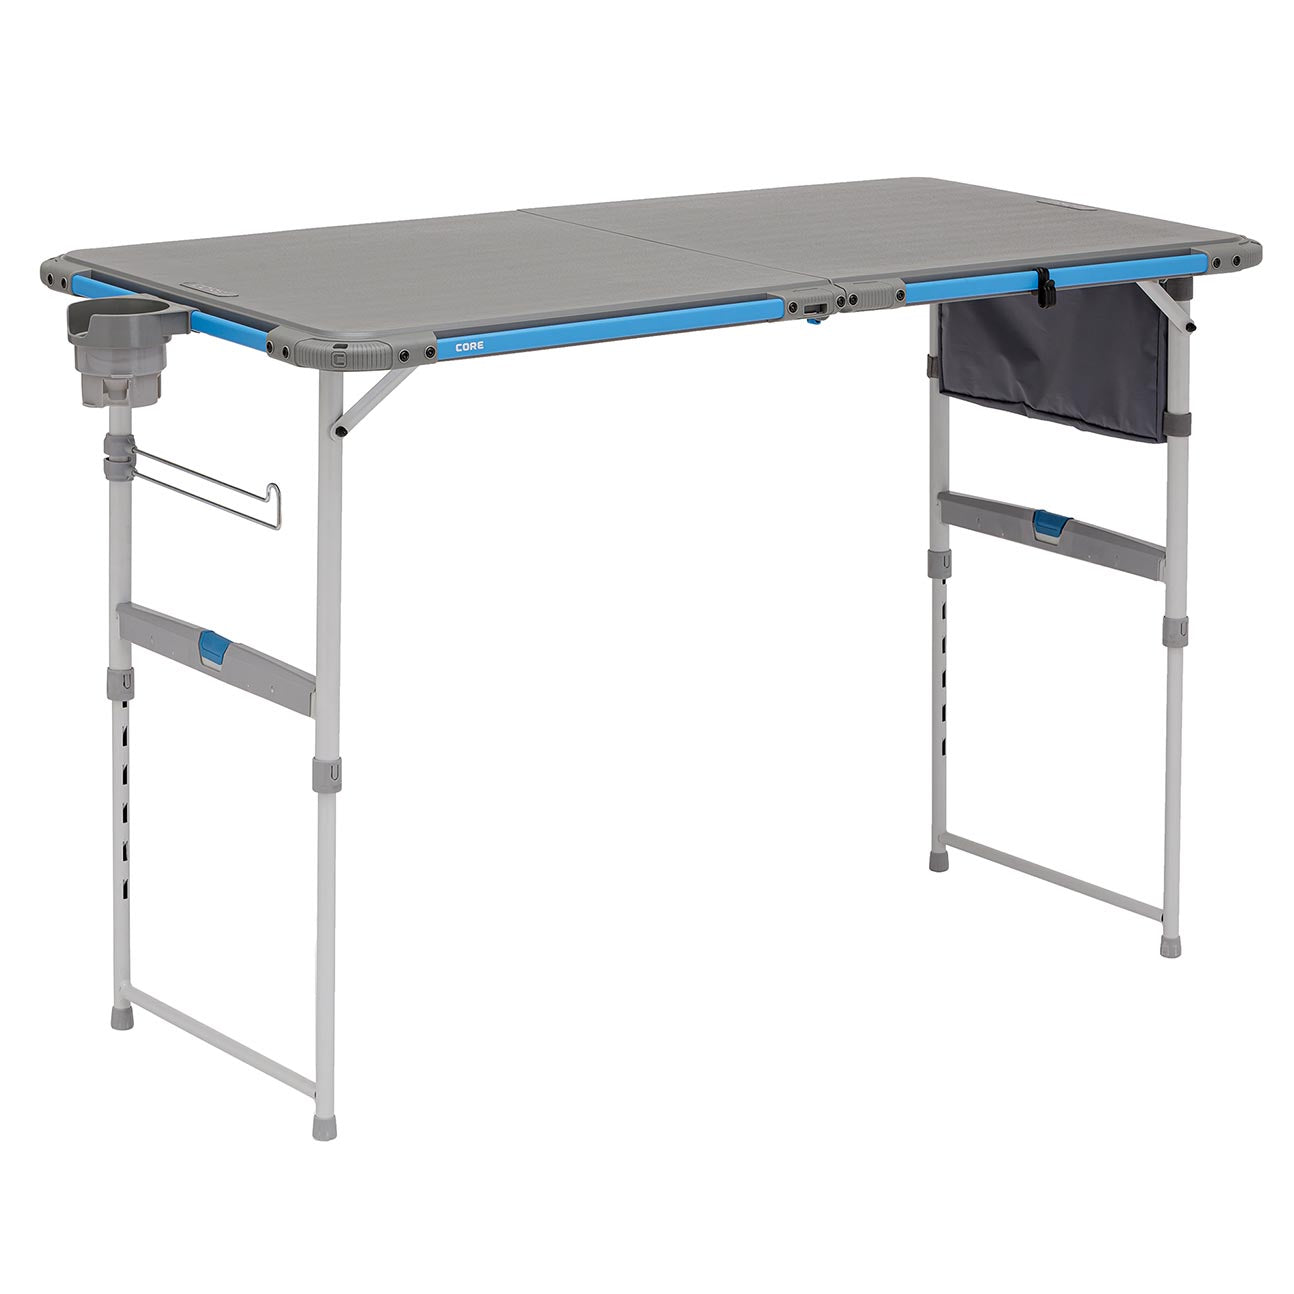 4 Foot Outdoor Table with FlexRail